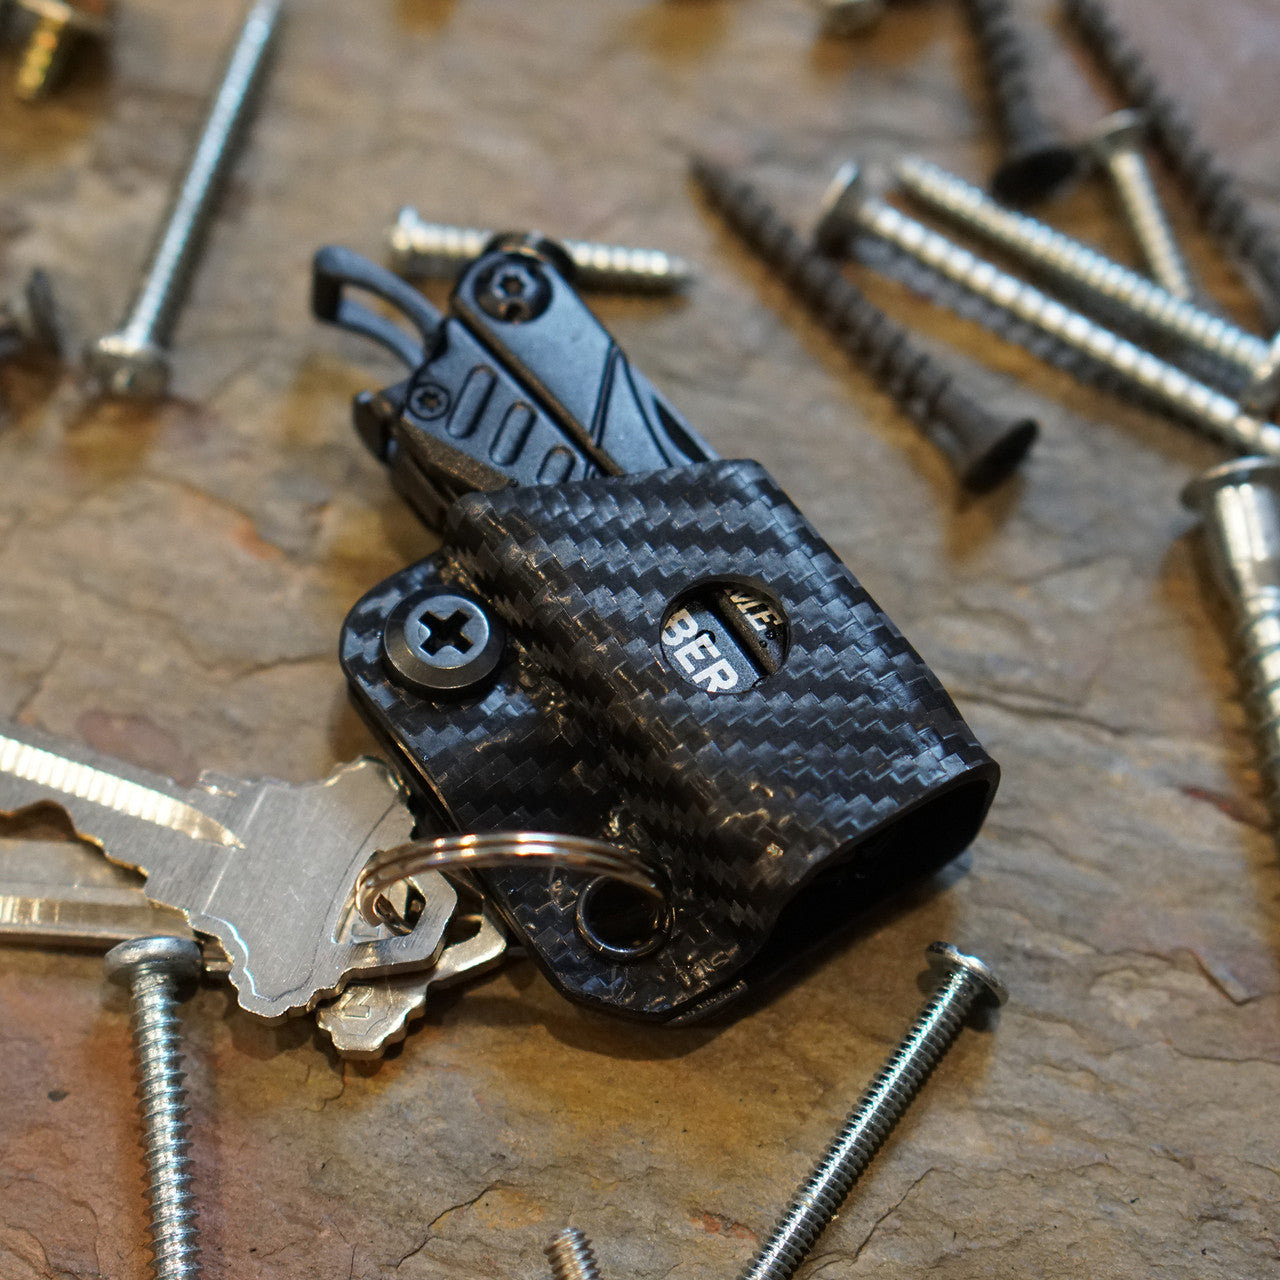 Kydex Keychain Sheath for the Gerber Dime & Leatherman Squirt Clip & Carry